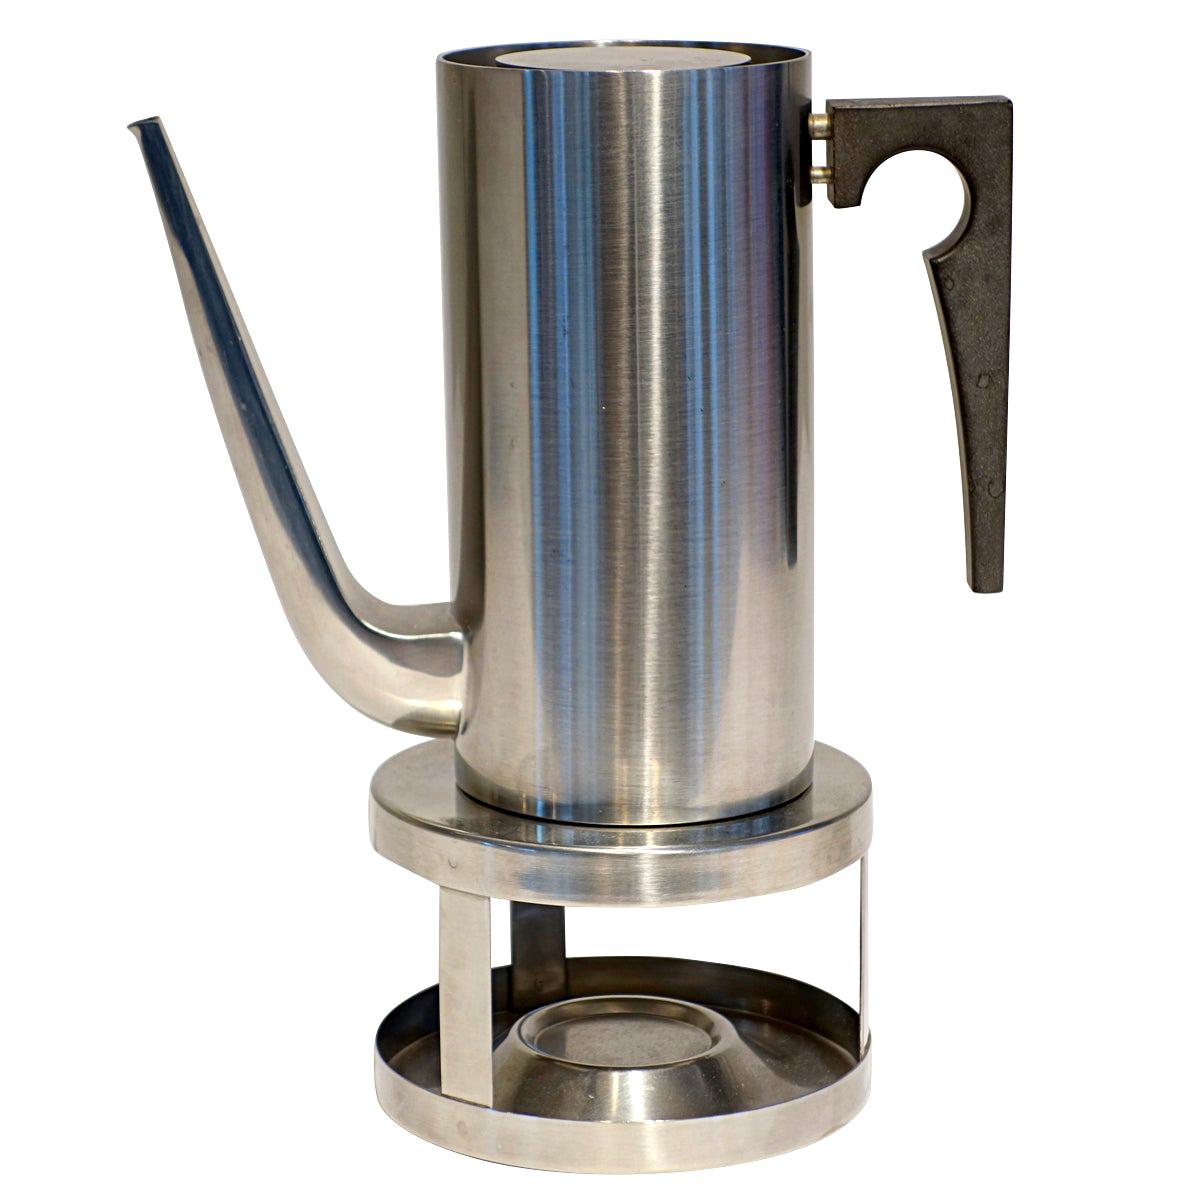 Midcentury Cylinda Coffee Pot and Stove by Arne Jacobsen for Stelton For Sale